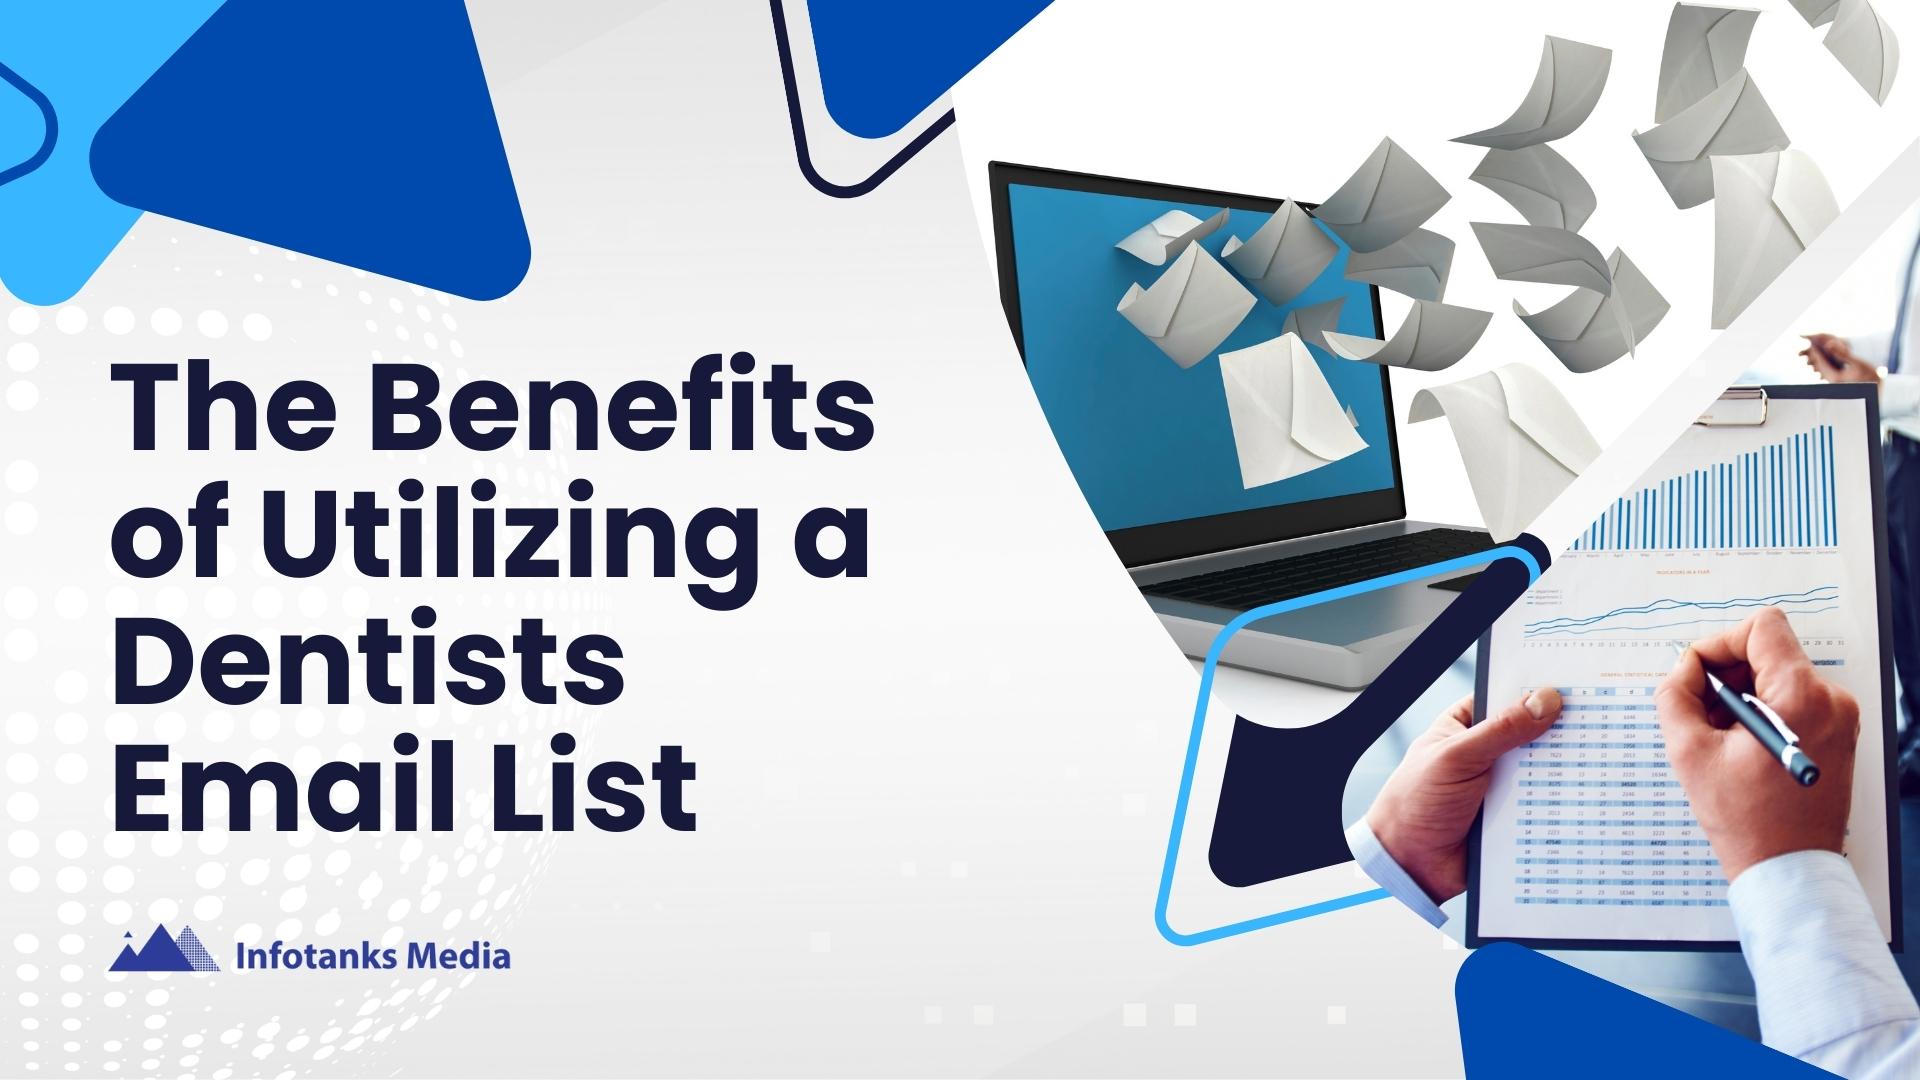 The Benefits of Utilizing a Dentists Email List